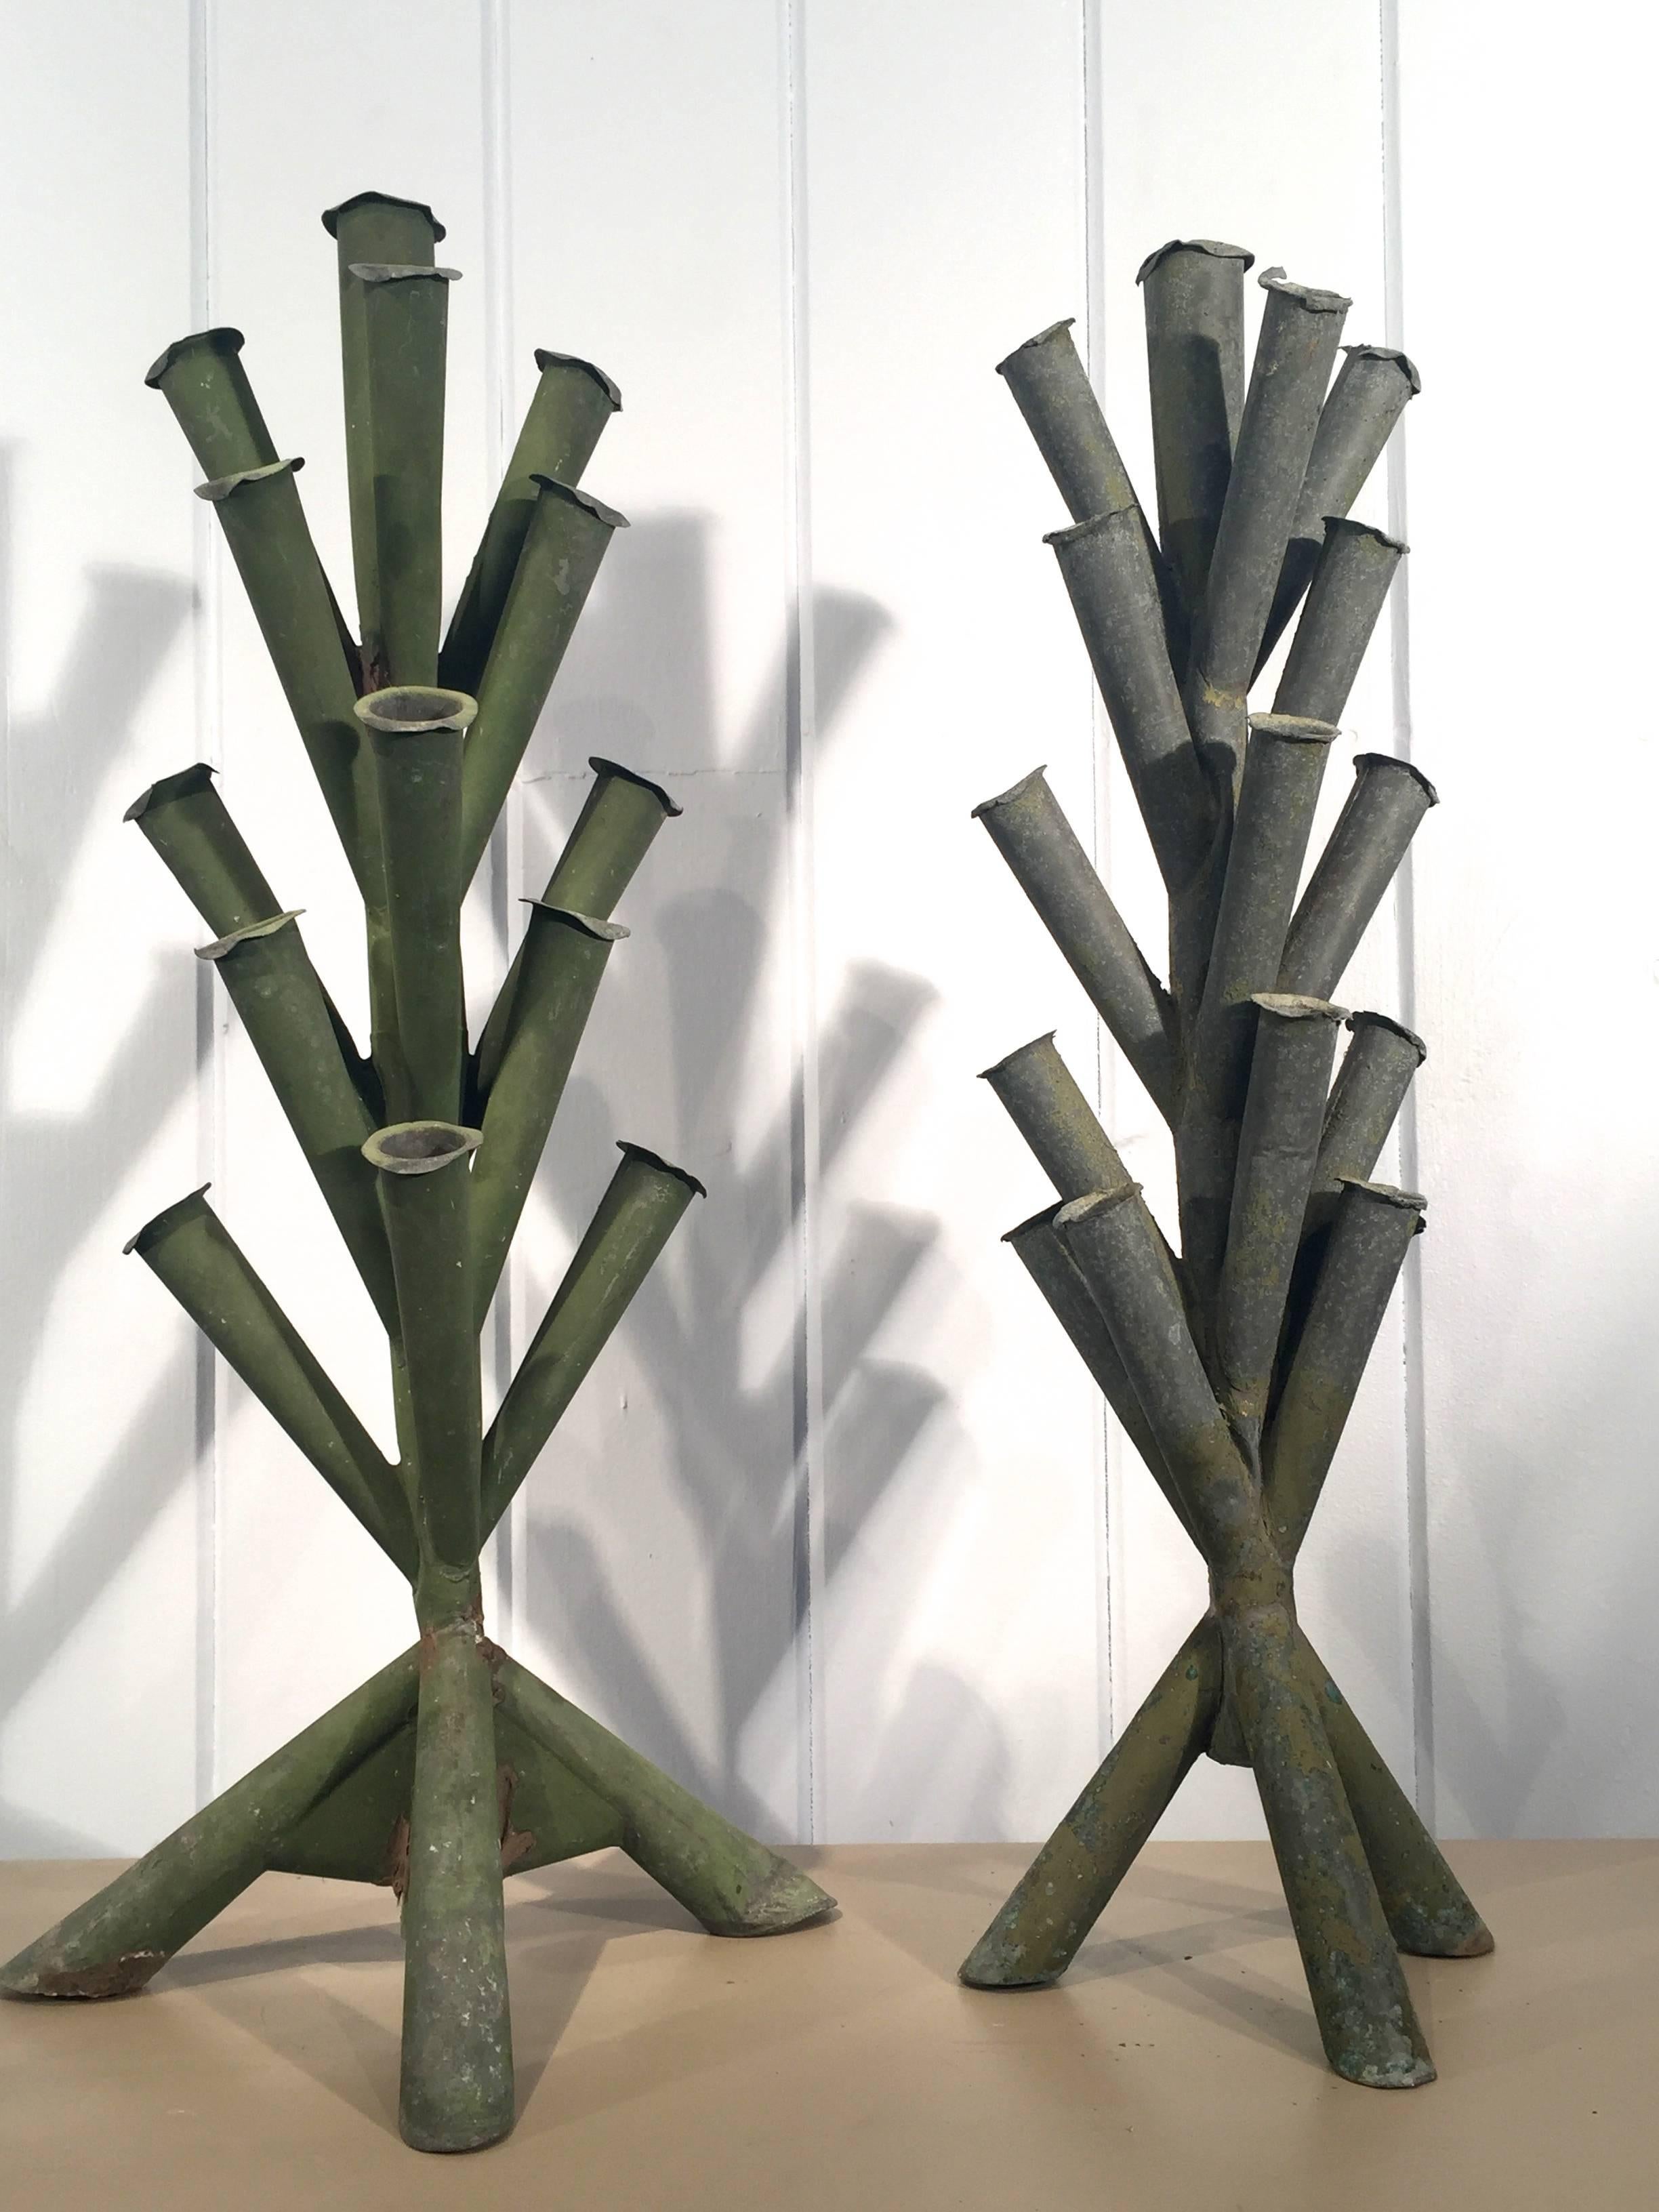 These lovely and unusual handmade zinc tulipieres were originally designed to hold tulip blooms. One sports a medium-green painted finish and the other is natural unpainted zinc. Their unusual form and contemporary feel makes them prime candidates